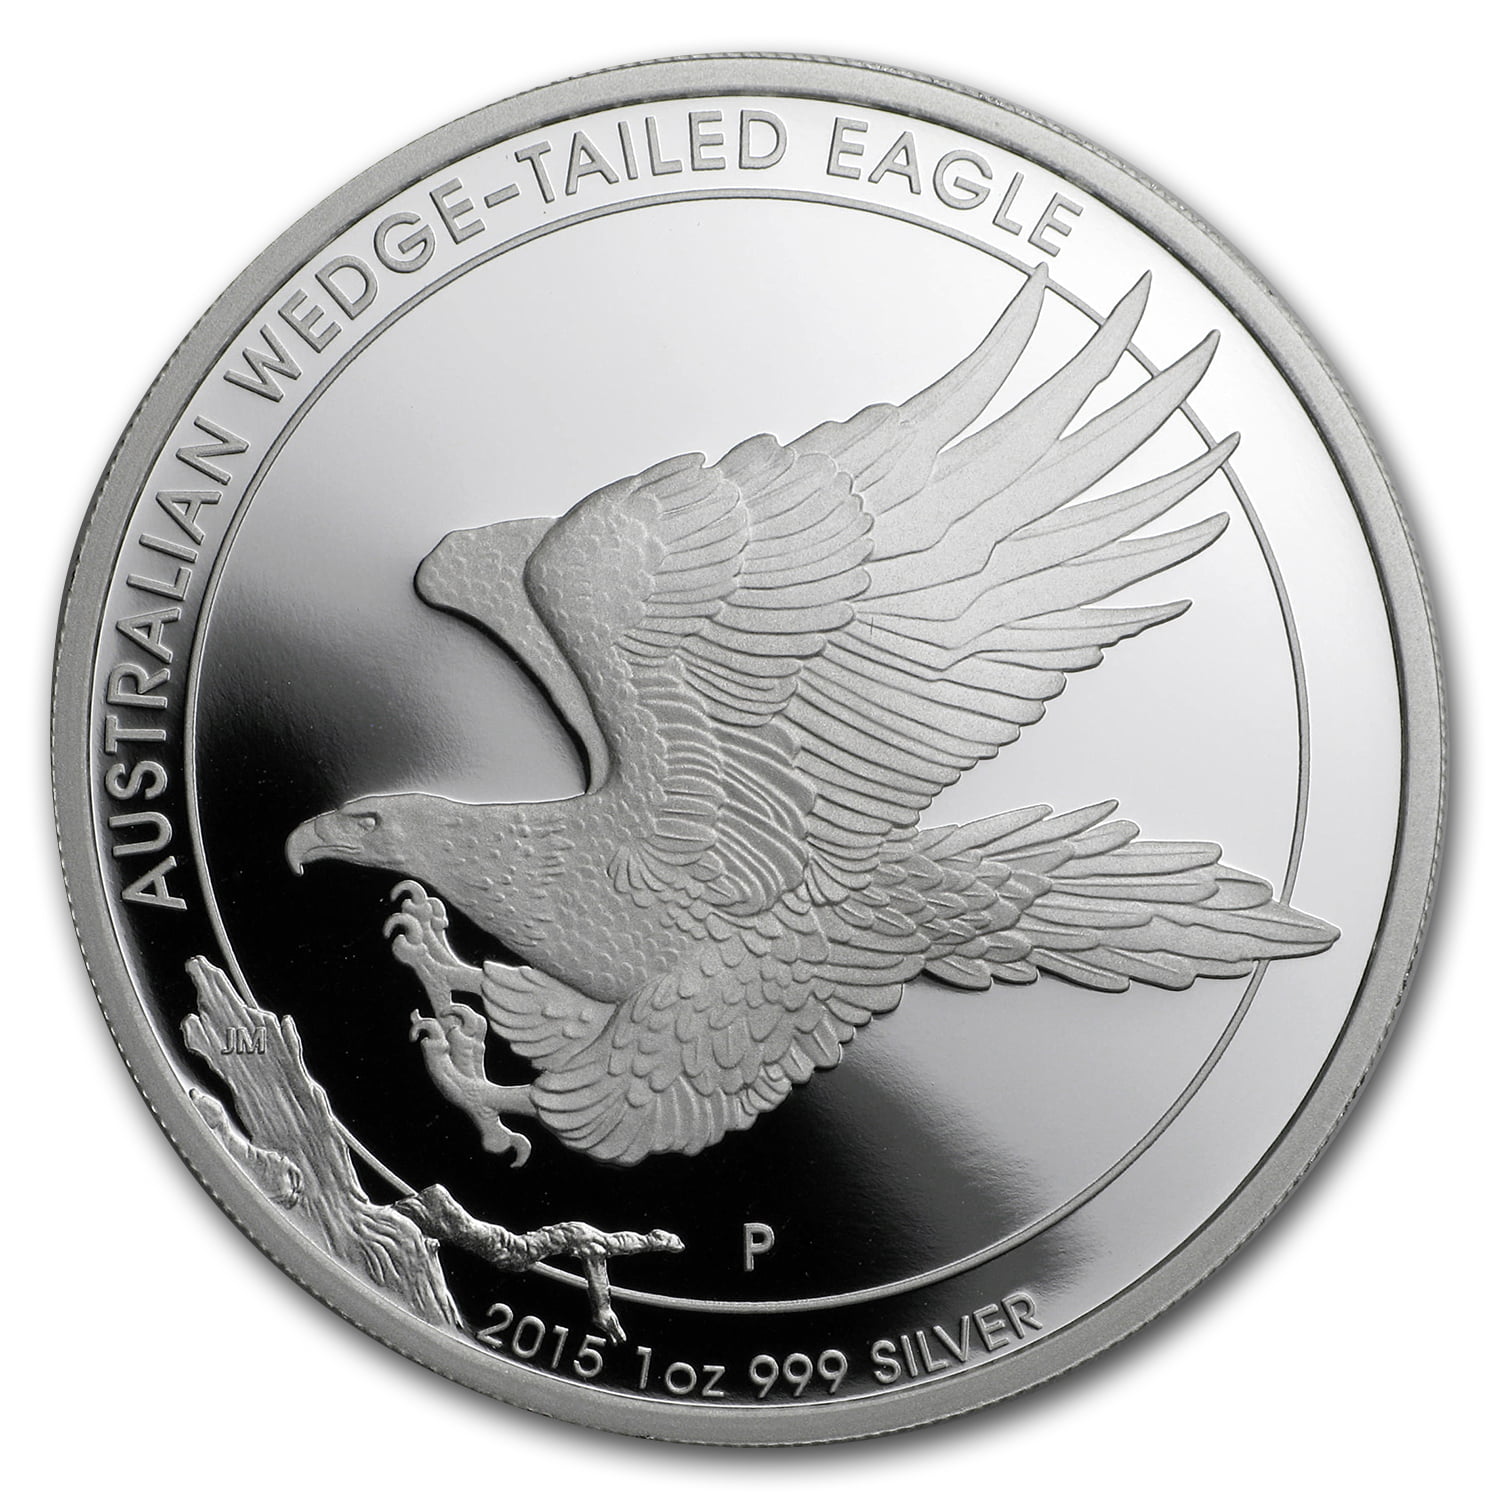 Free Shipping! 2015 Silver Wedge Tailed Eagle High Relief w/OGP 